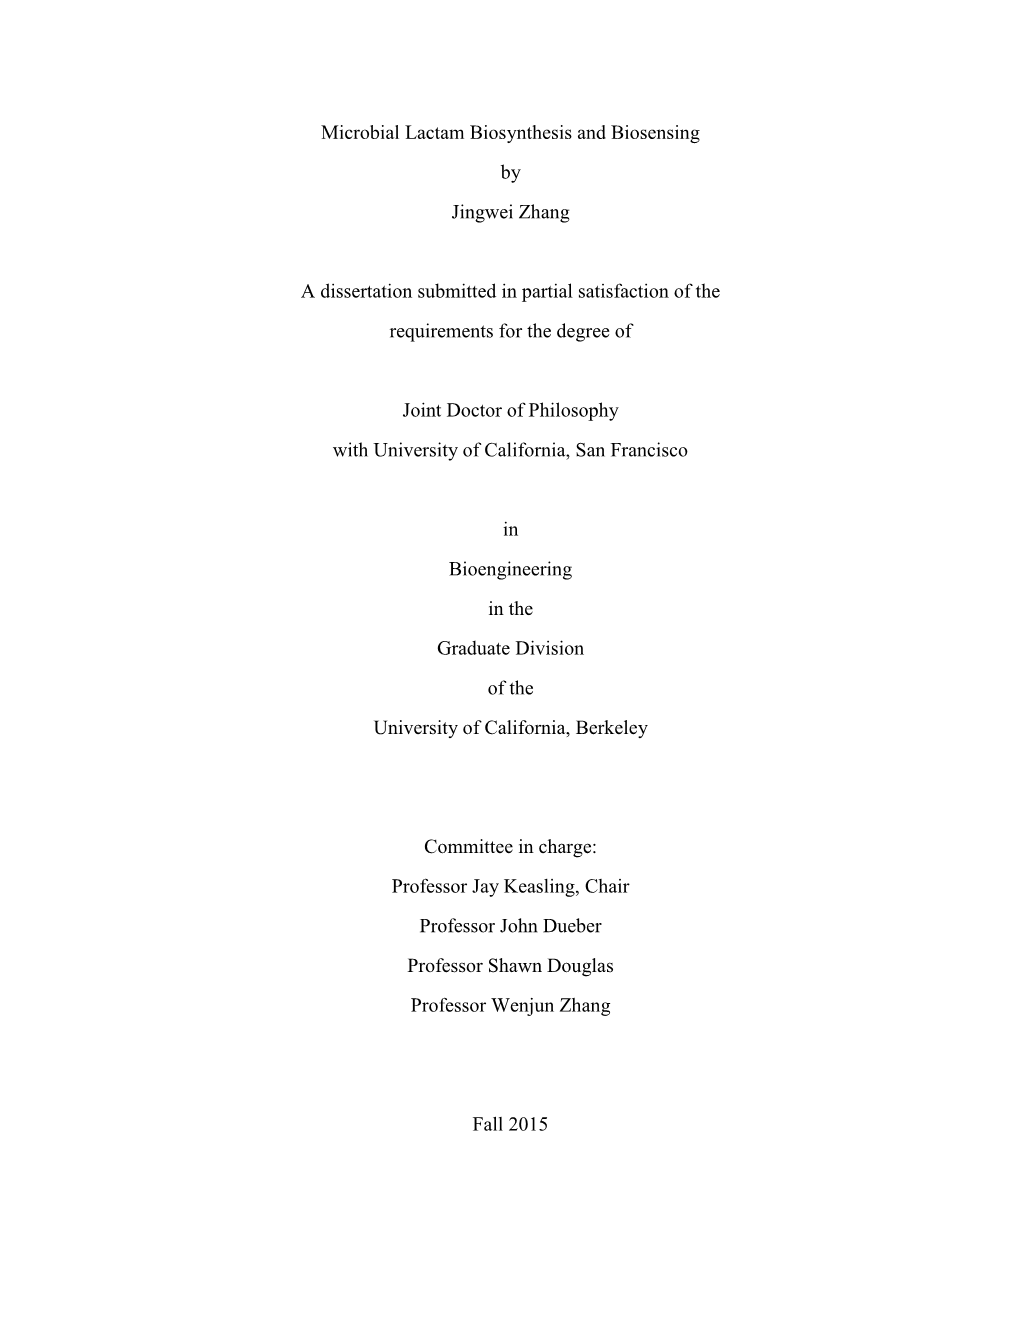 Microbial Lactam Biosynthesis and Biosensing by Jingwei Zhang a Dissertation Submitted in Partial Satisfaction of the Requiremen